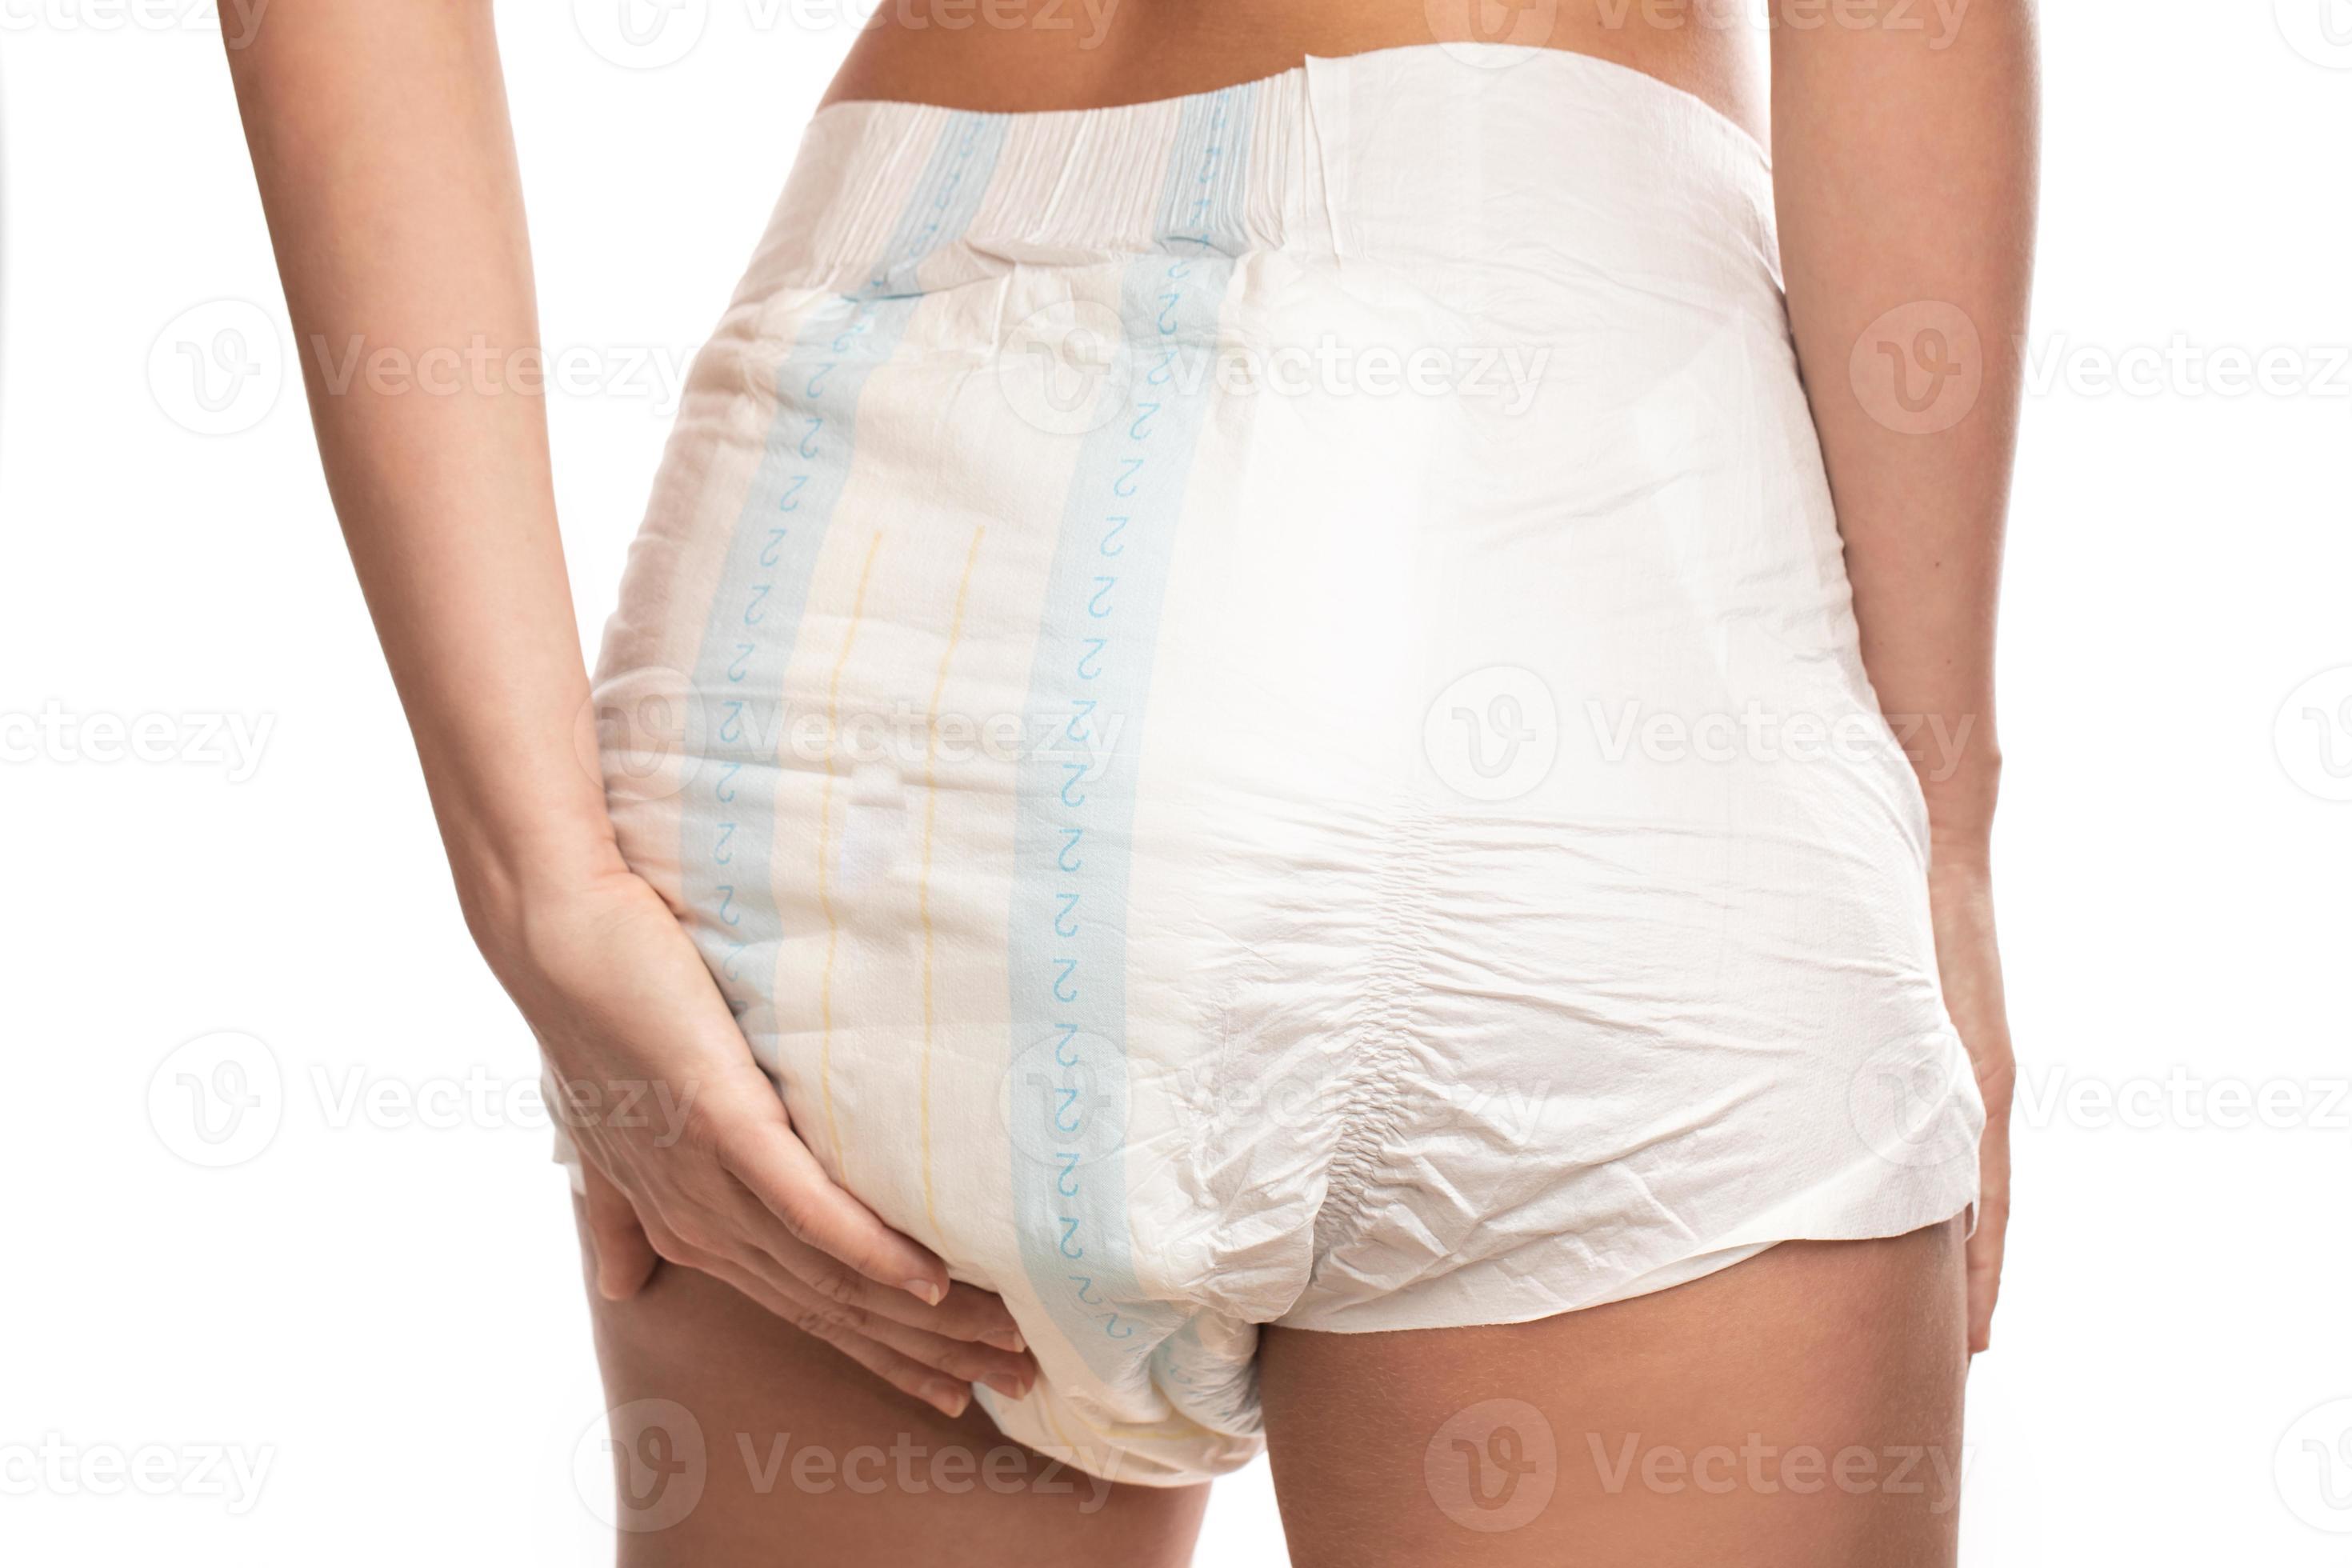 pictures of women wearing diapers